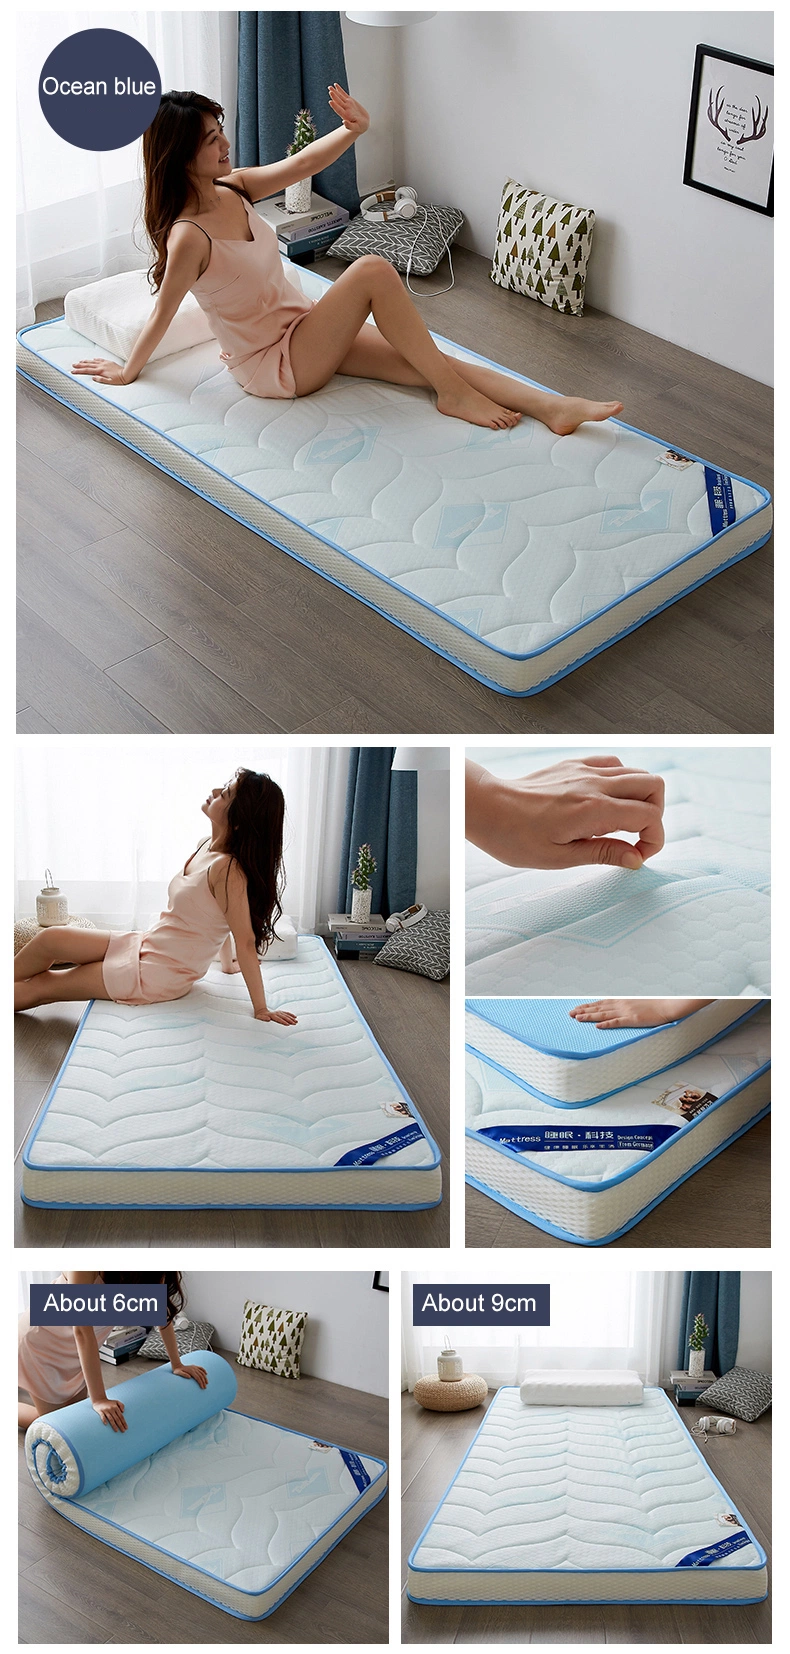 Motel Bunk Bed Mattress Thick 6cm Portable Skin Friendly Latex Layer Double